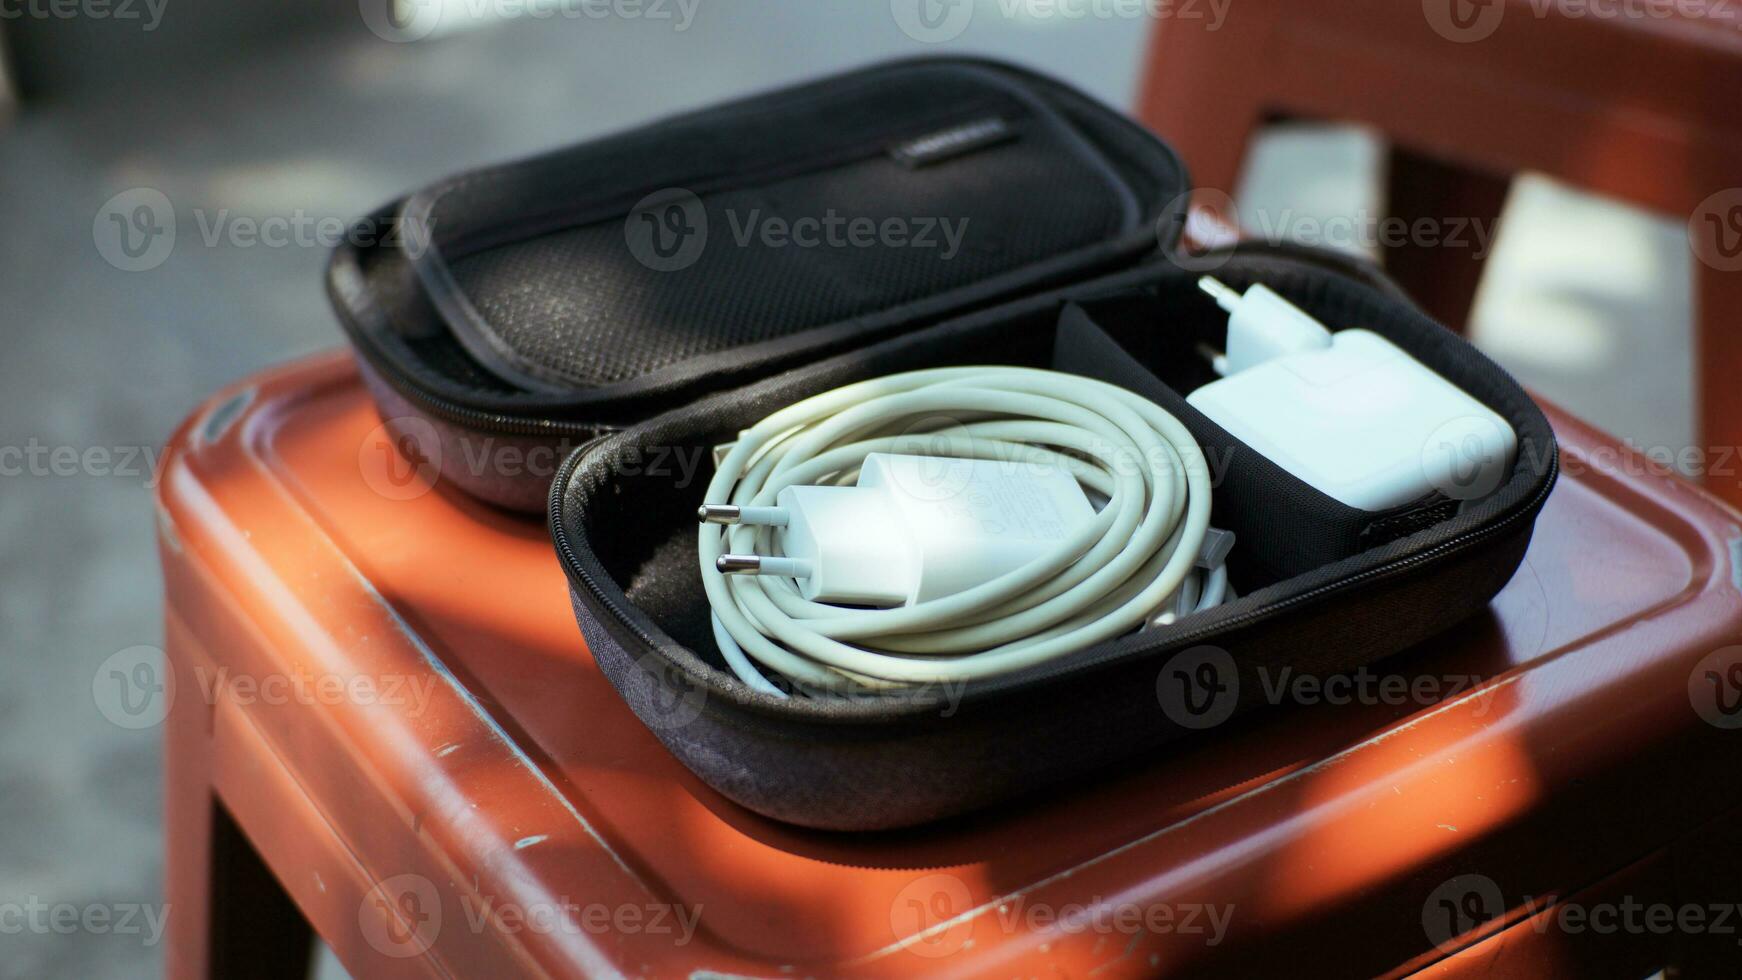 Modern bag for professional storage of cables, charging equipment or electronic equipment during trip or travel. photo